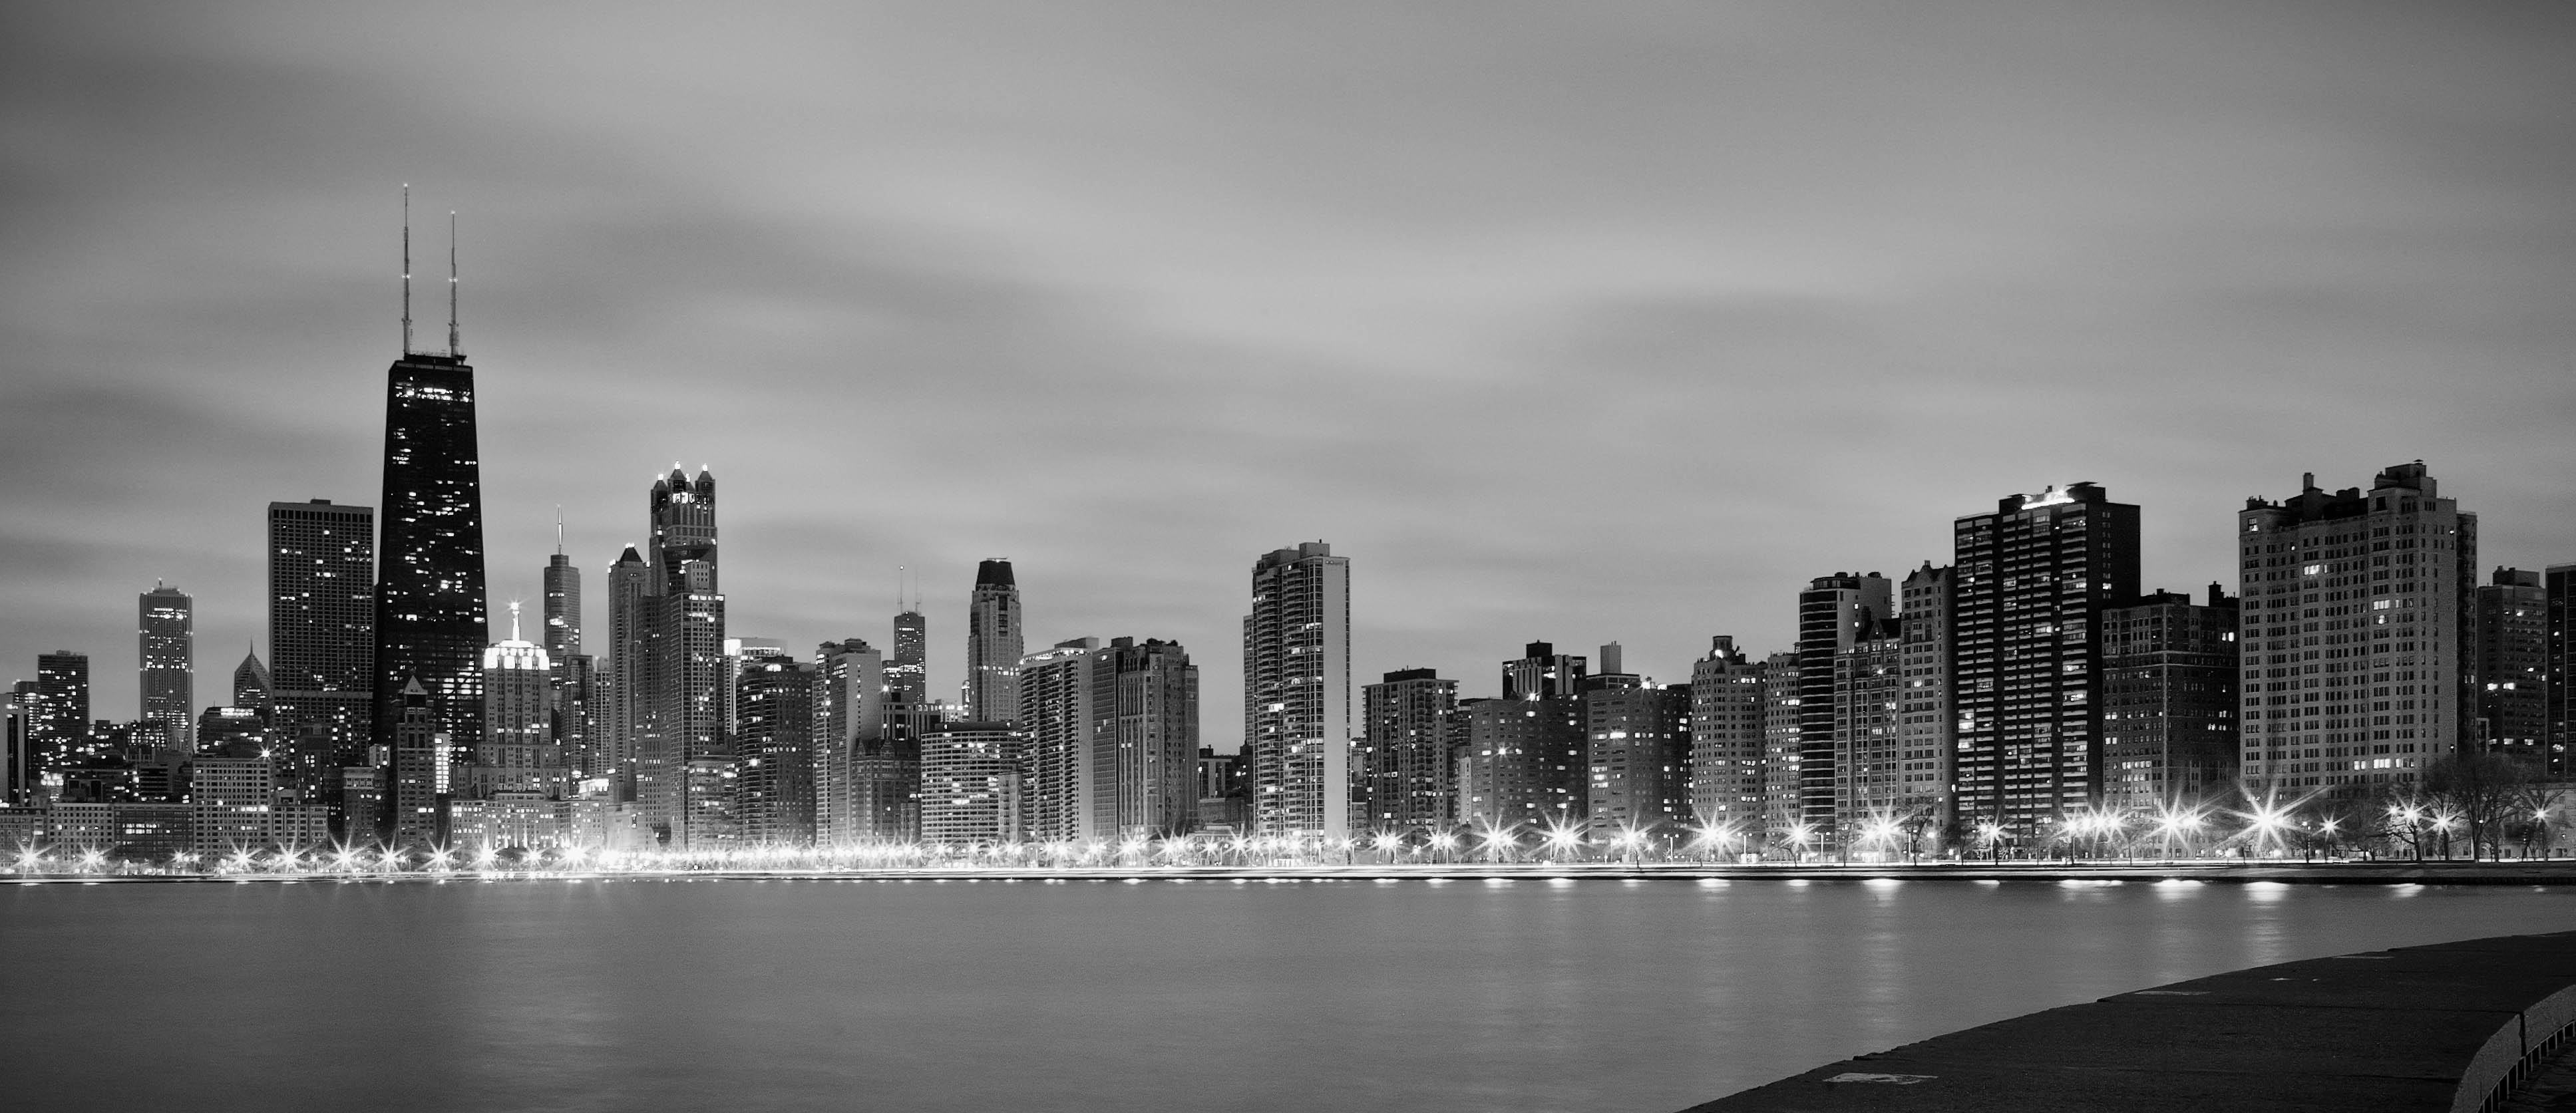 chicago skyline backgrounds - wallpaper cave